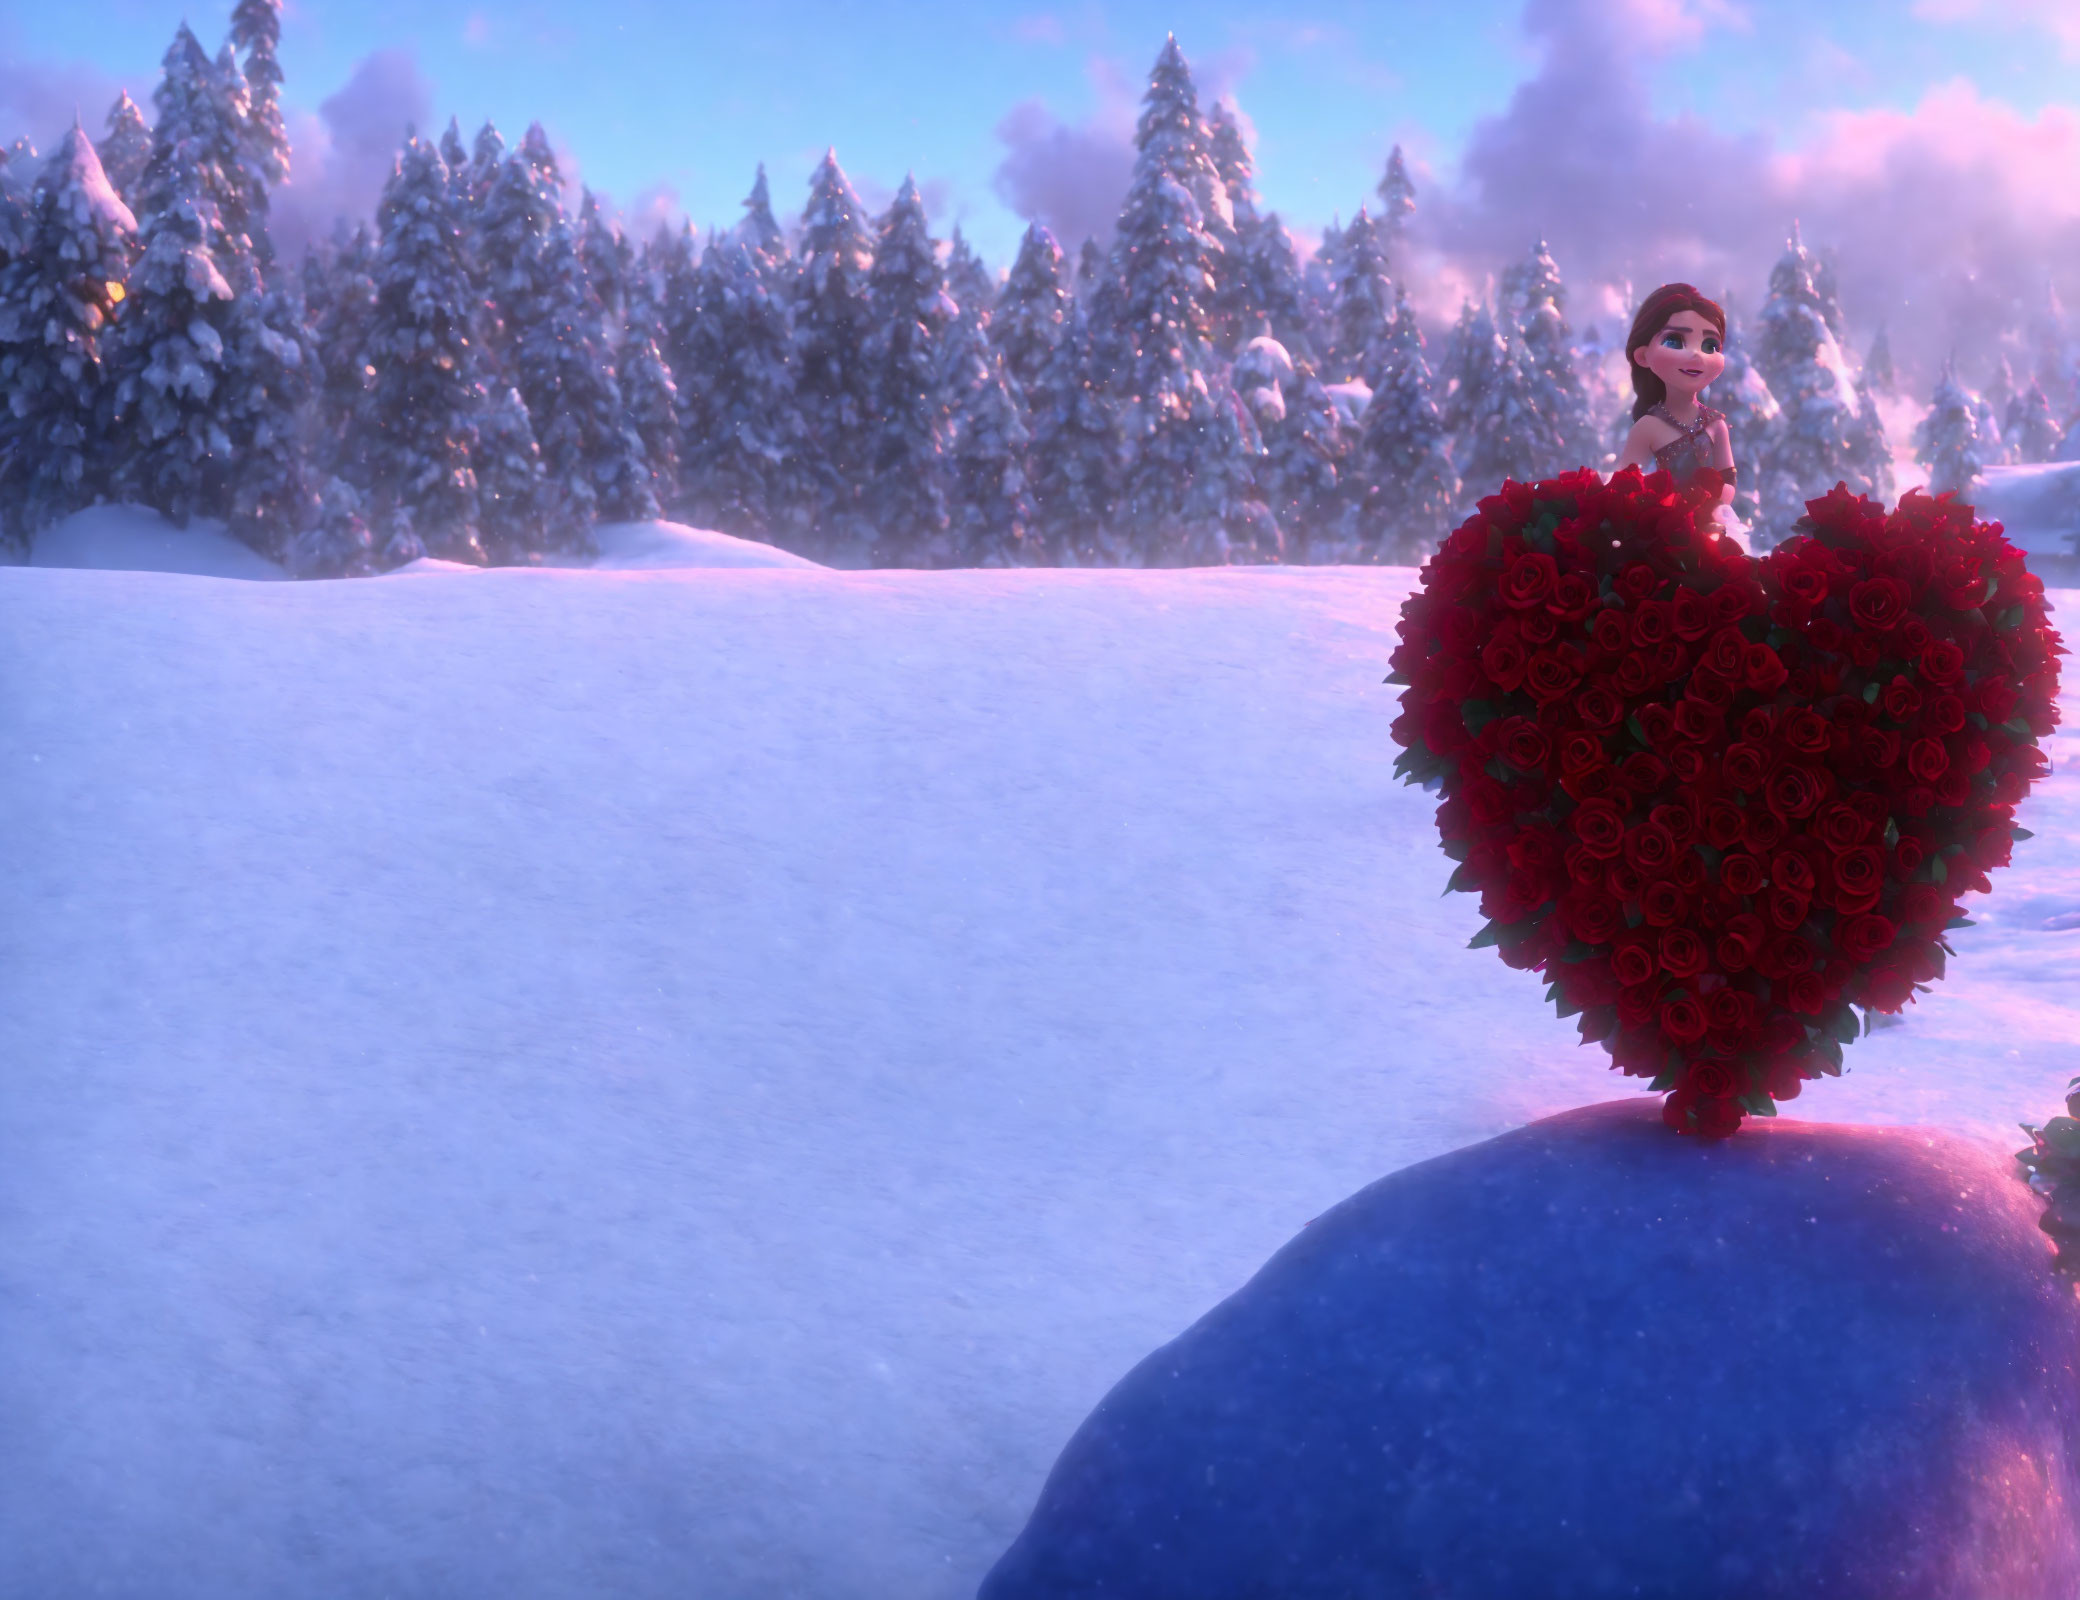 Cartoon character on hill with rose heart, snowy backdrop.